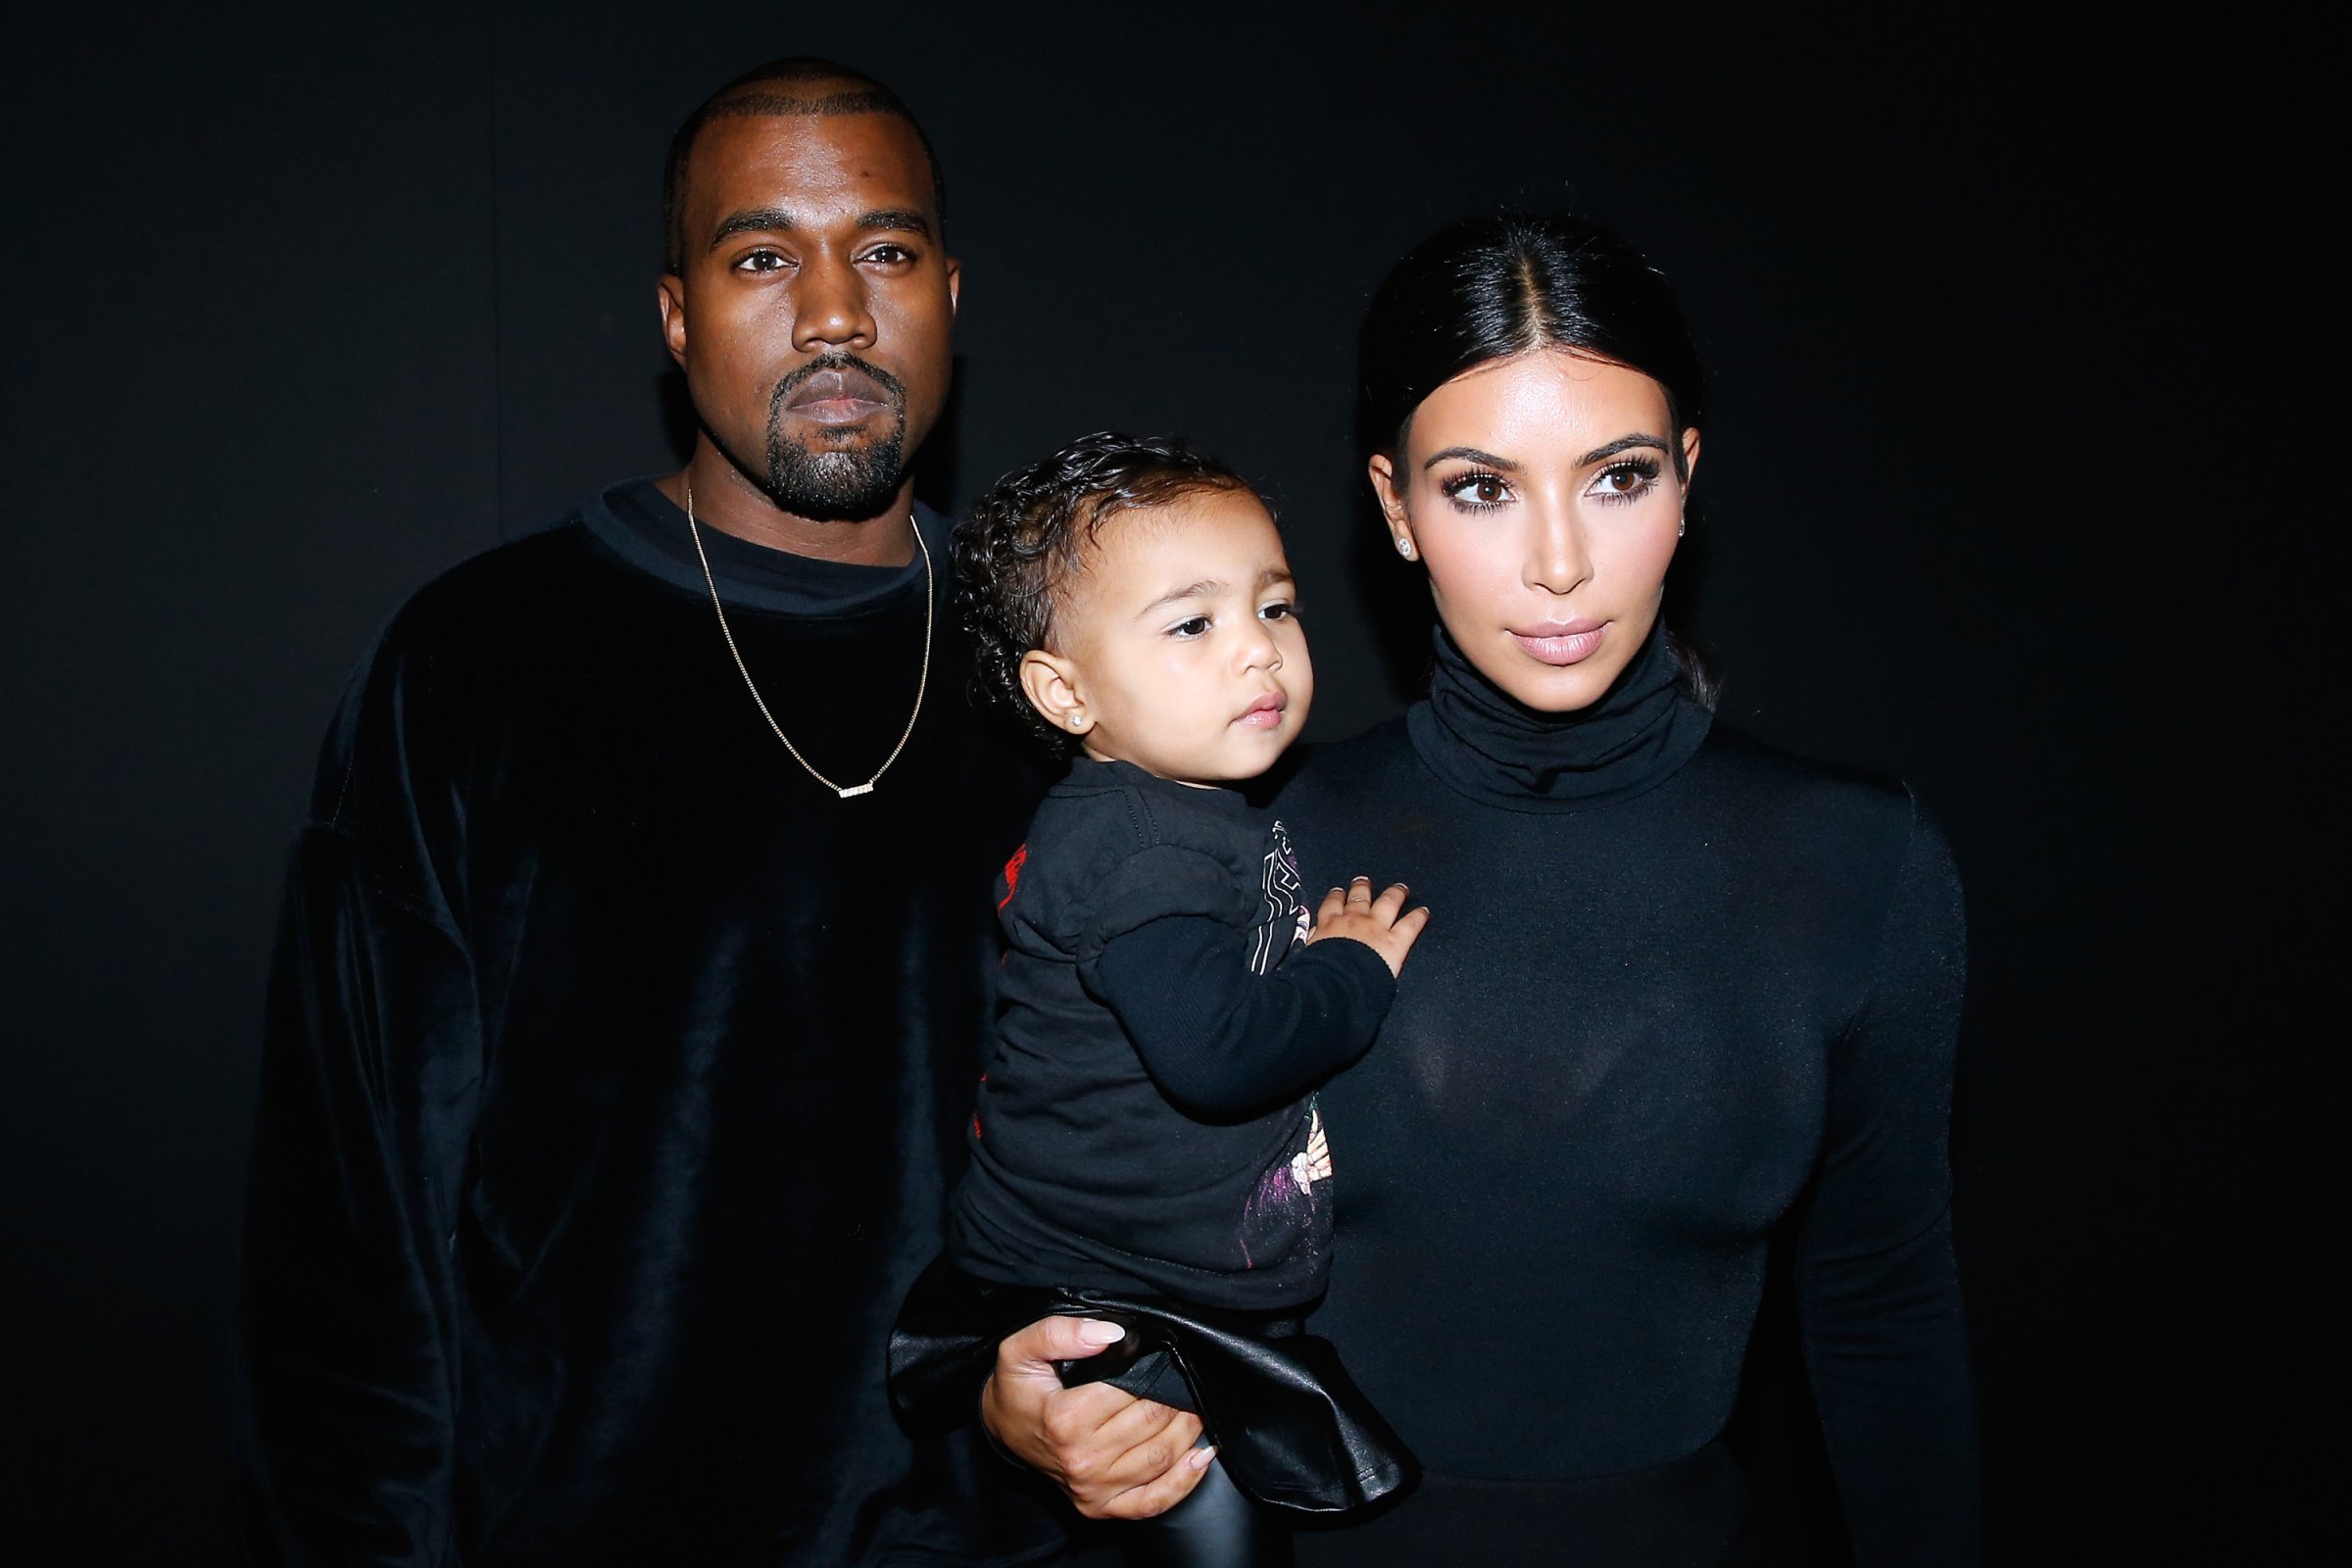 Kanye West, Kim Kardashian and their daughter North West attend the Balenciaga show as part of the Paris Fashion Week Womenswear Spring/Summer 2015 on September 24, 2014 in Paris, France.